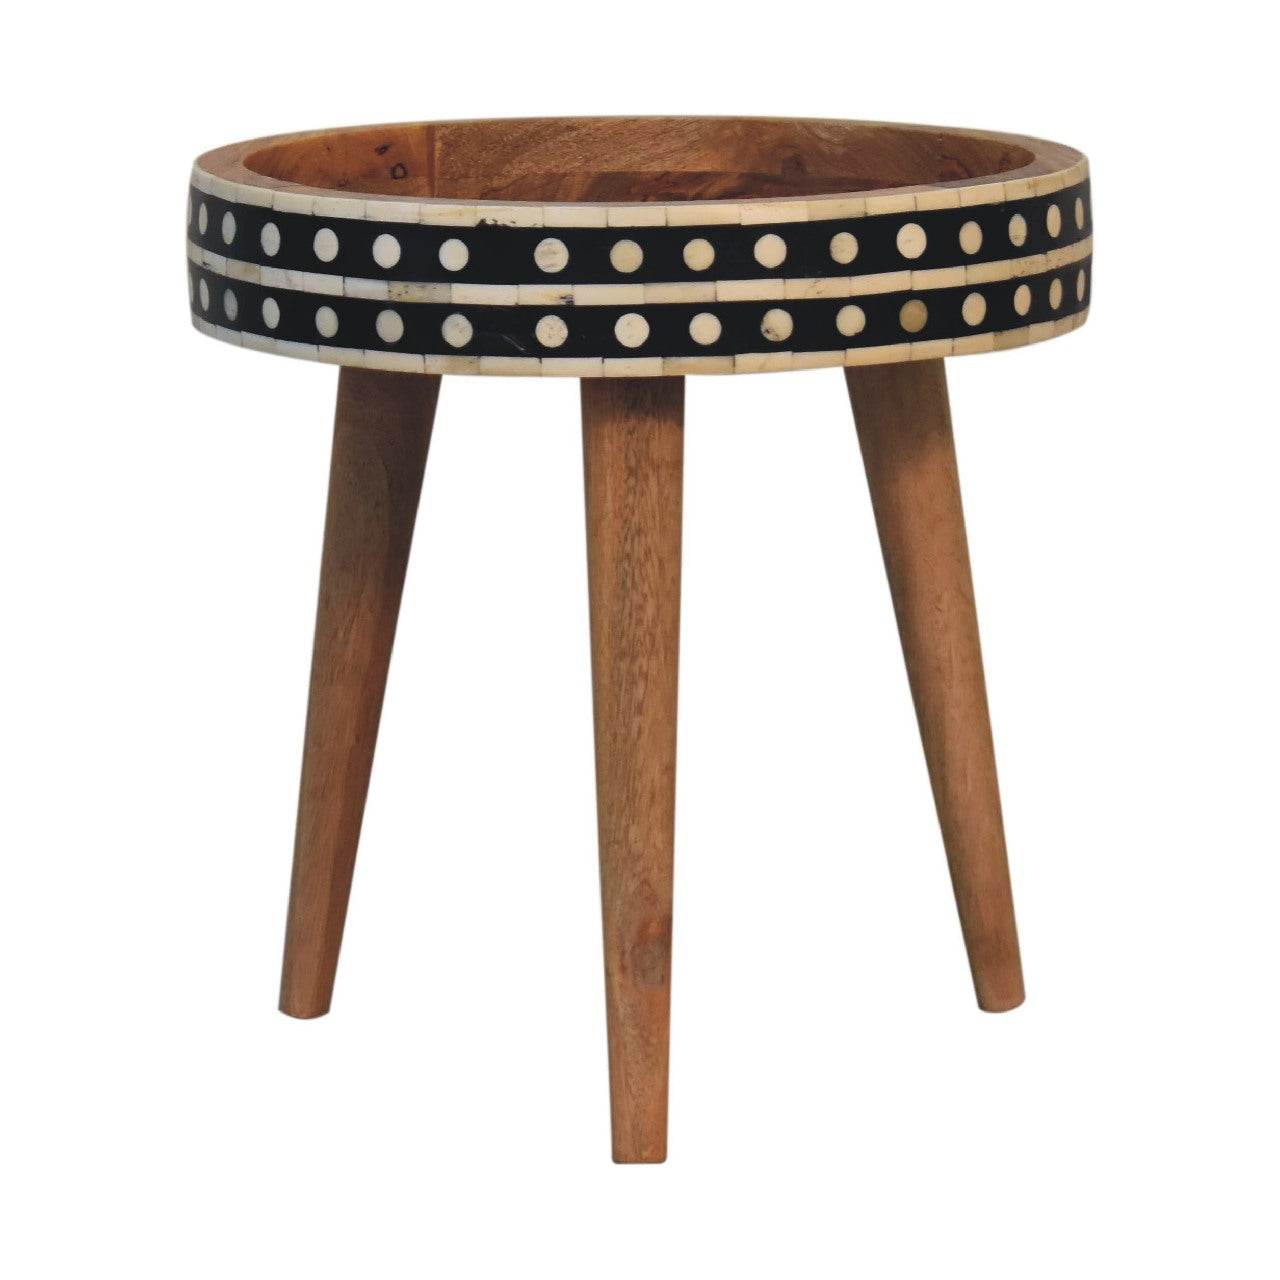 View Mini Patterned Nordic Style End Table information